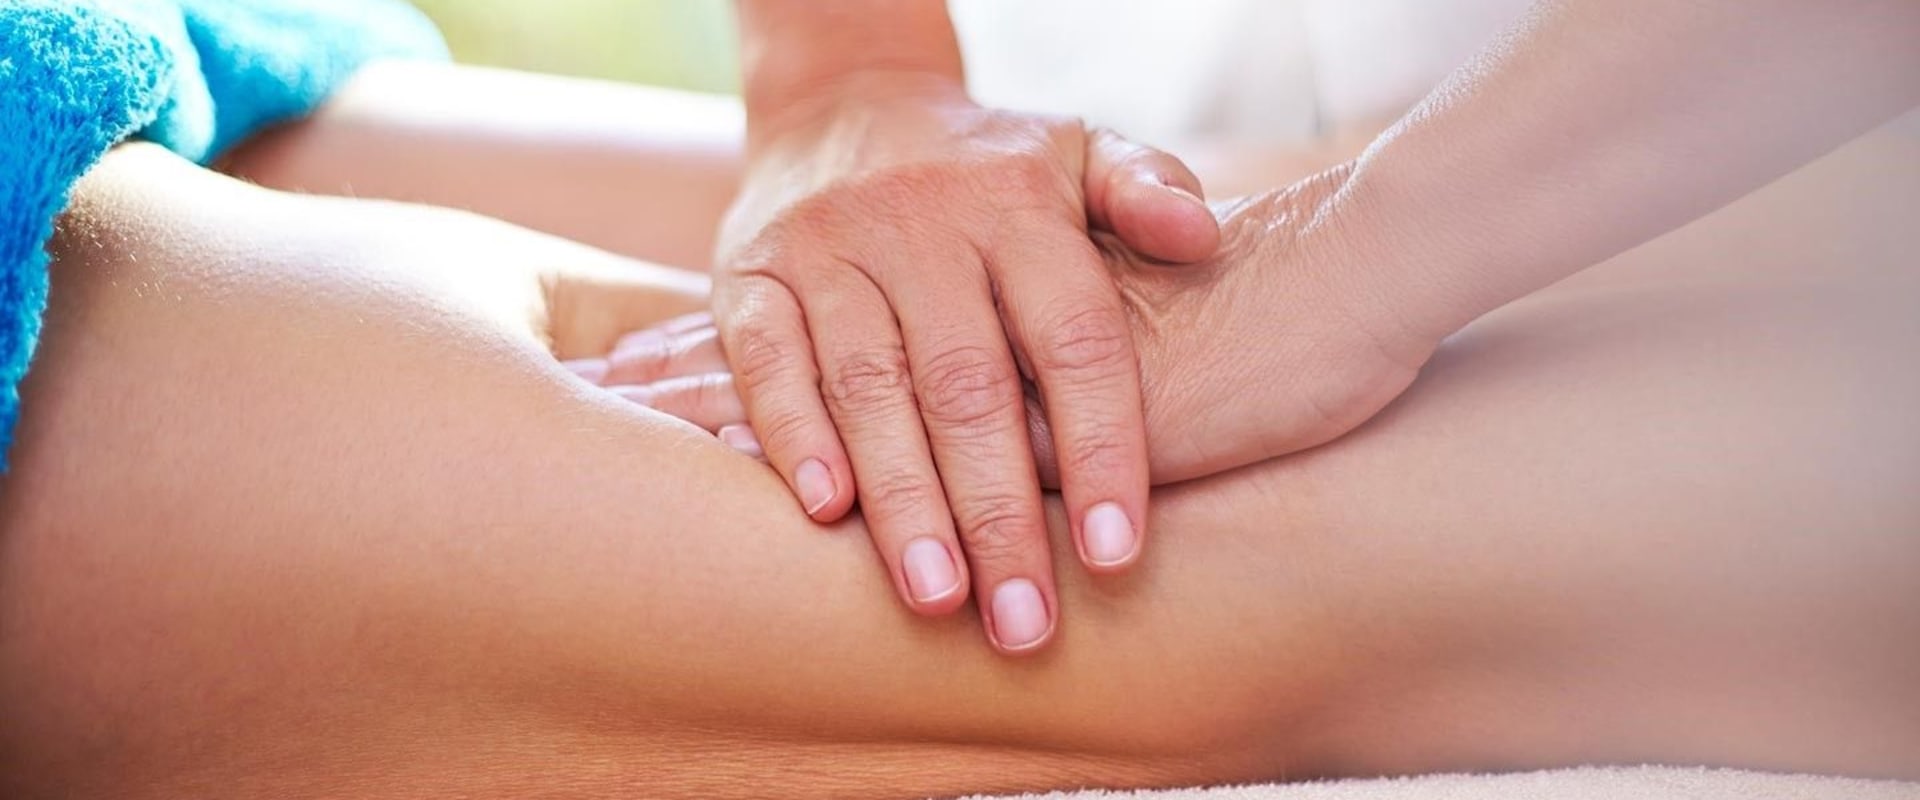 How long does deep tissue massage take to heal?